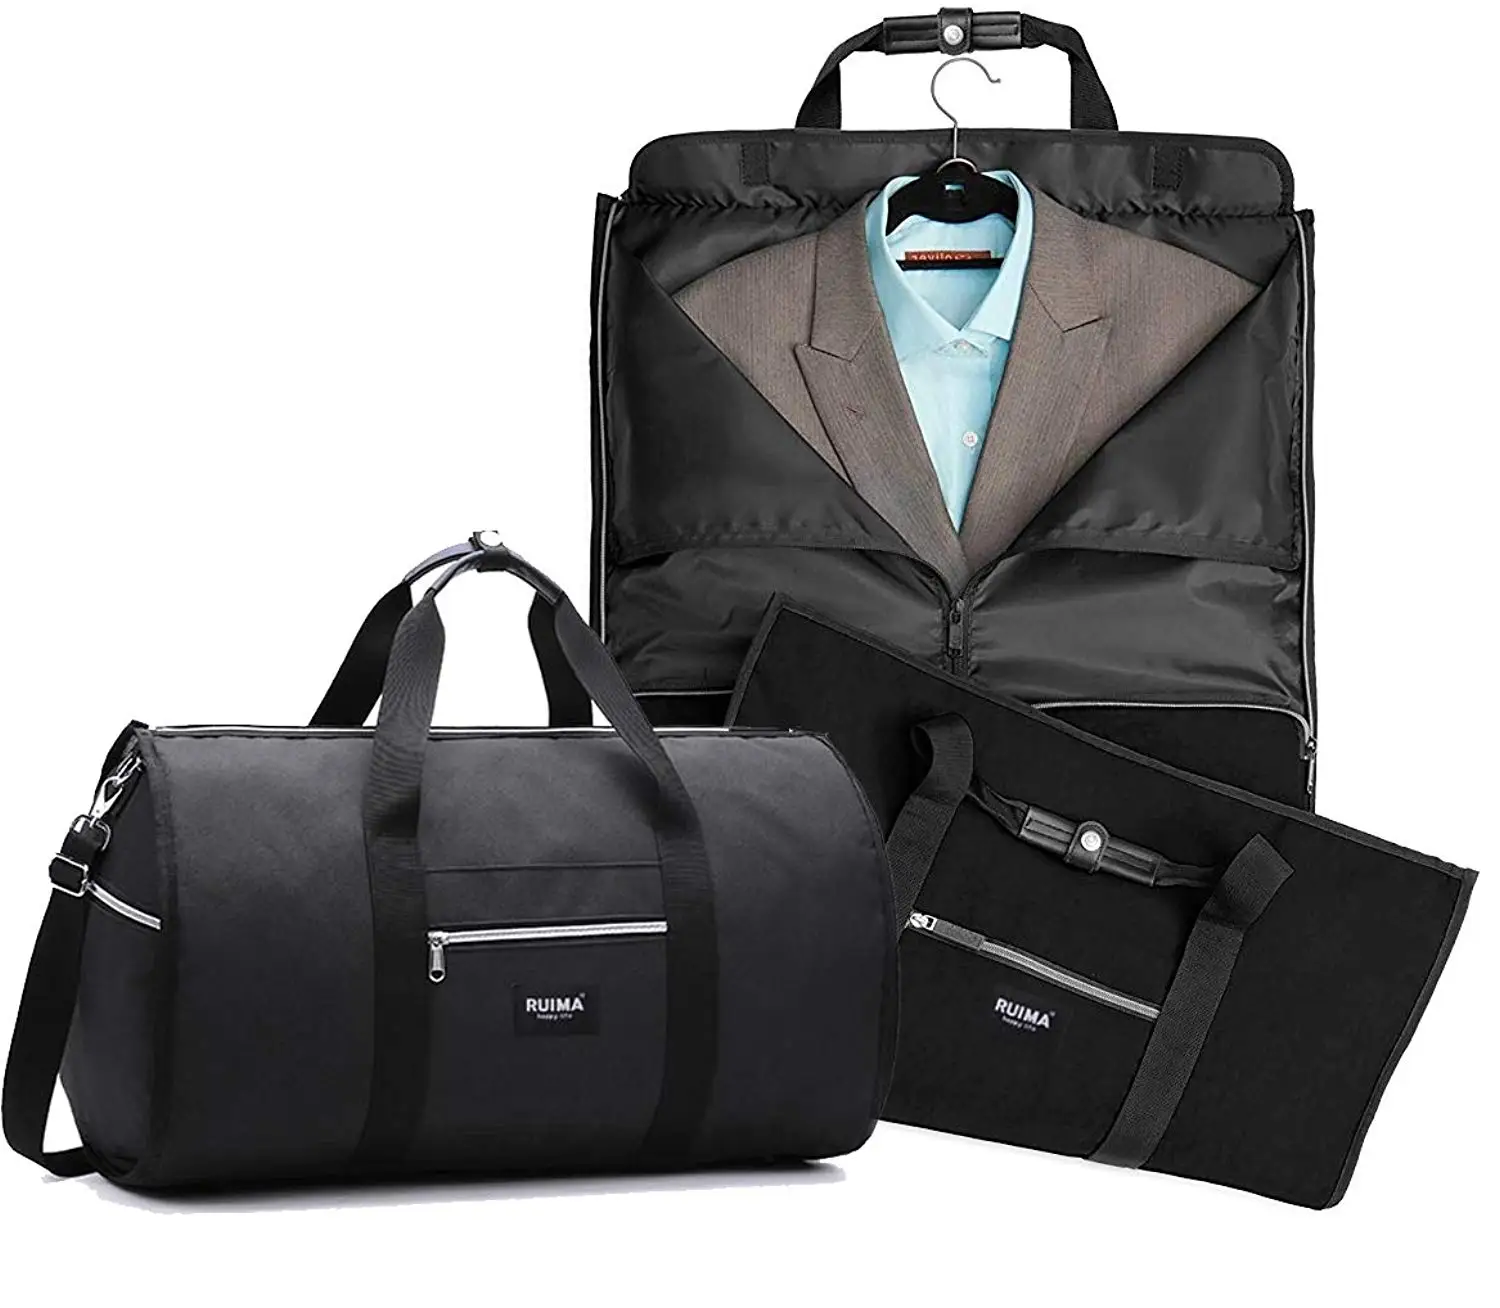 Where To Find A Garment Bag - Monty Ross blog